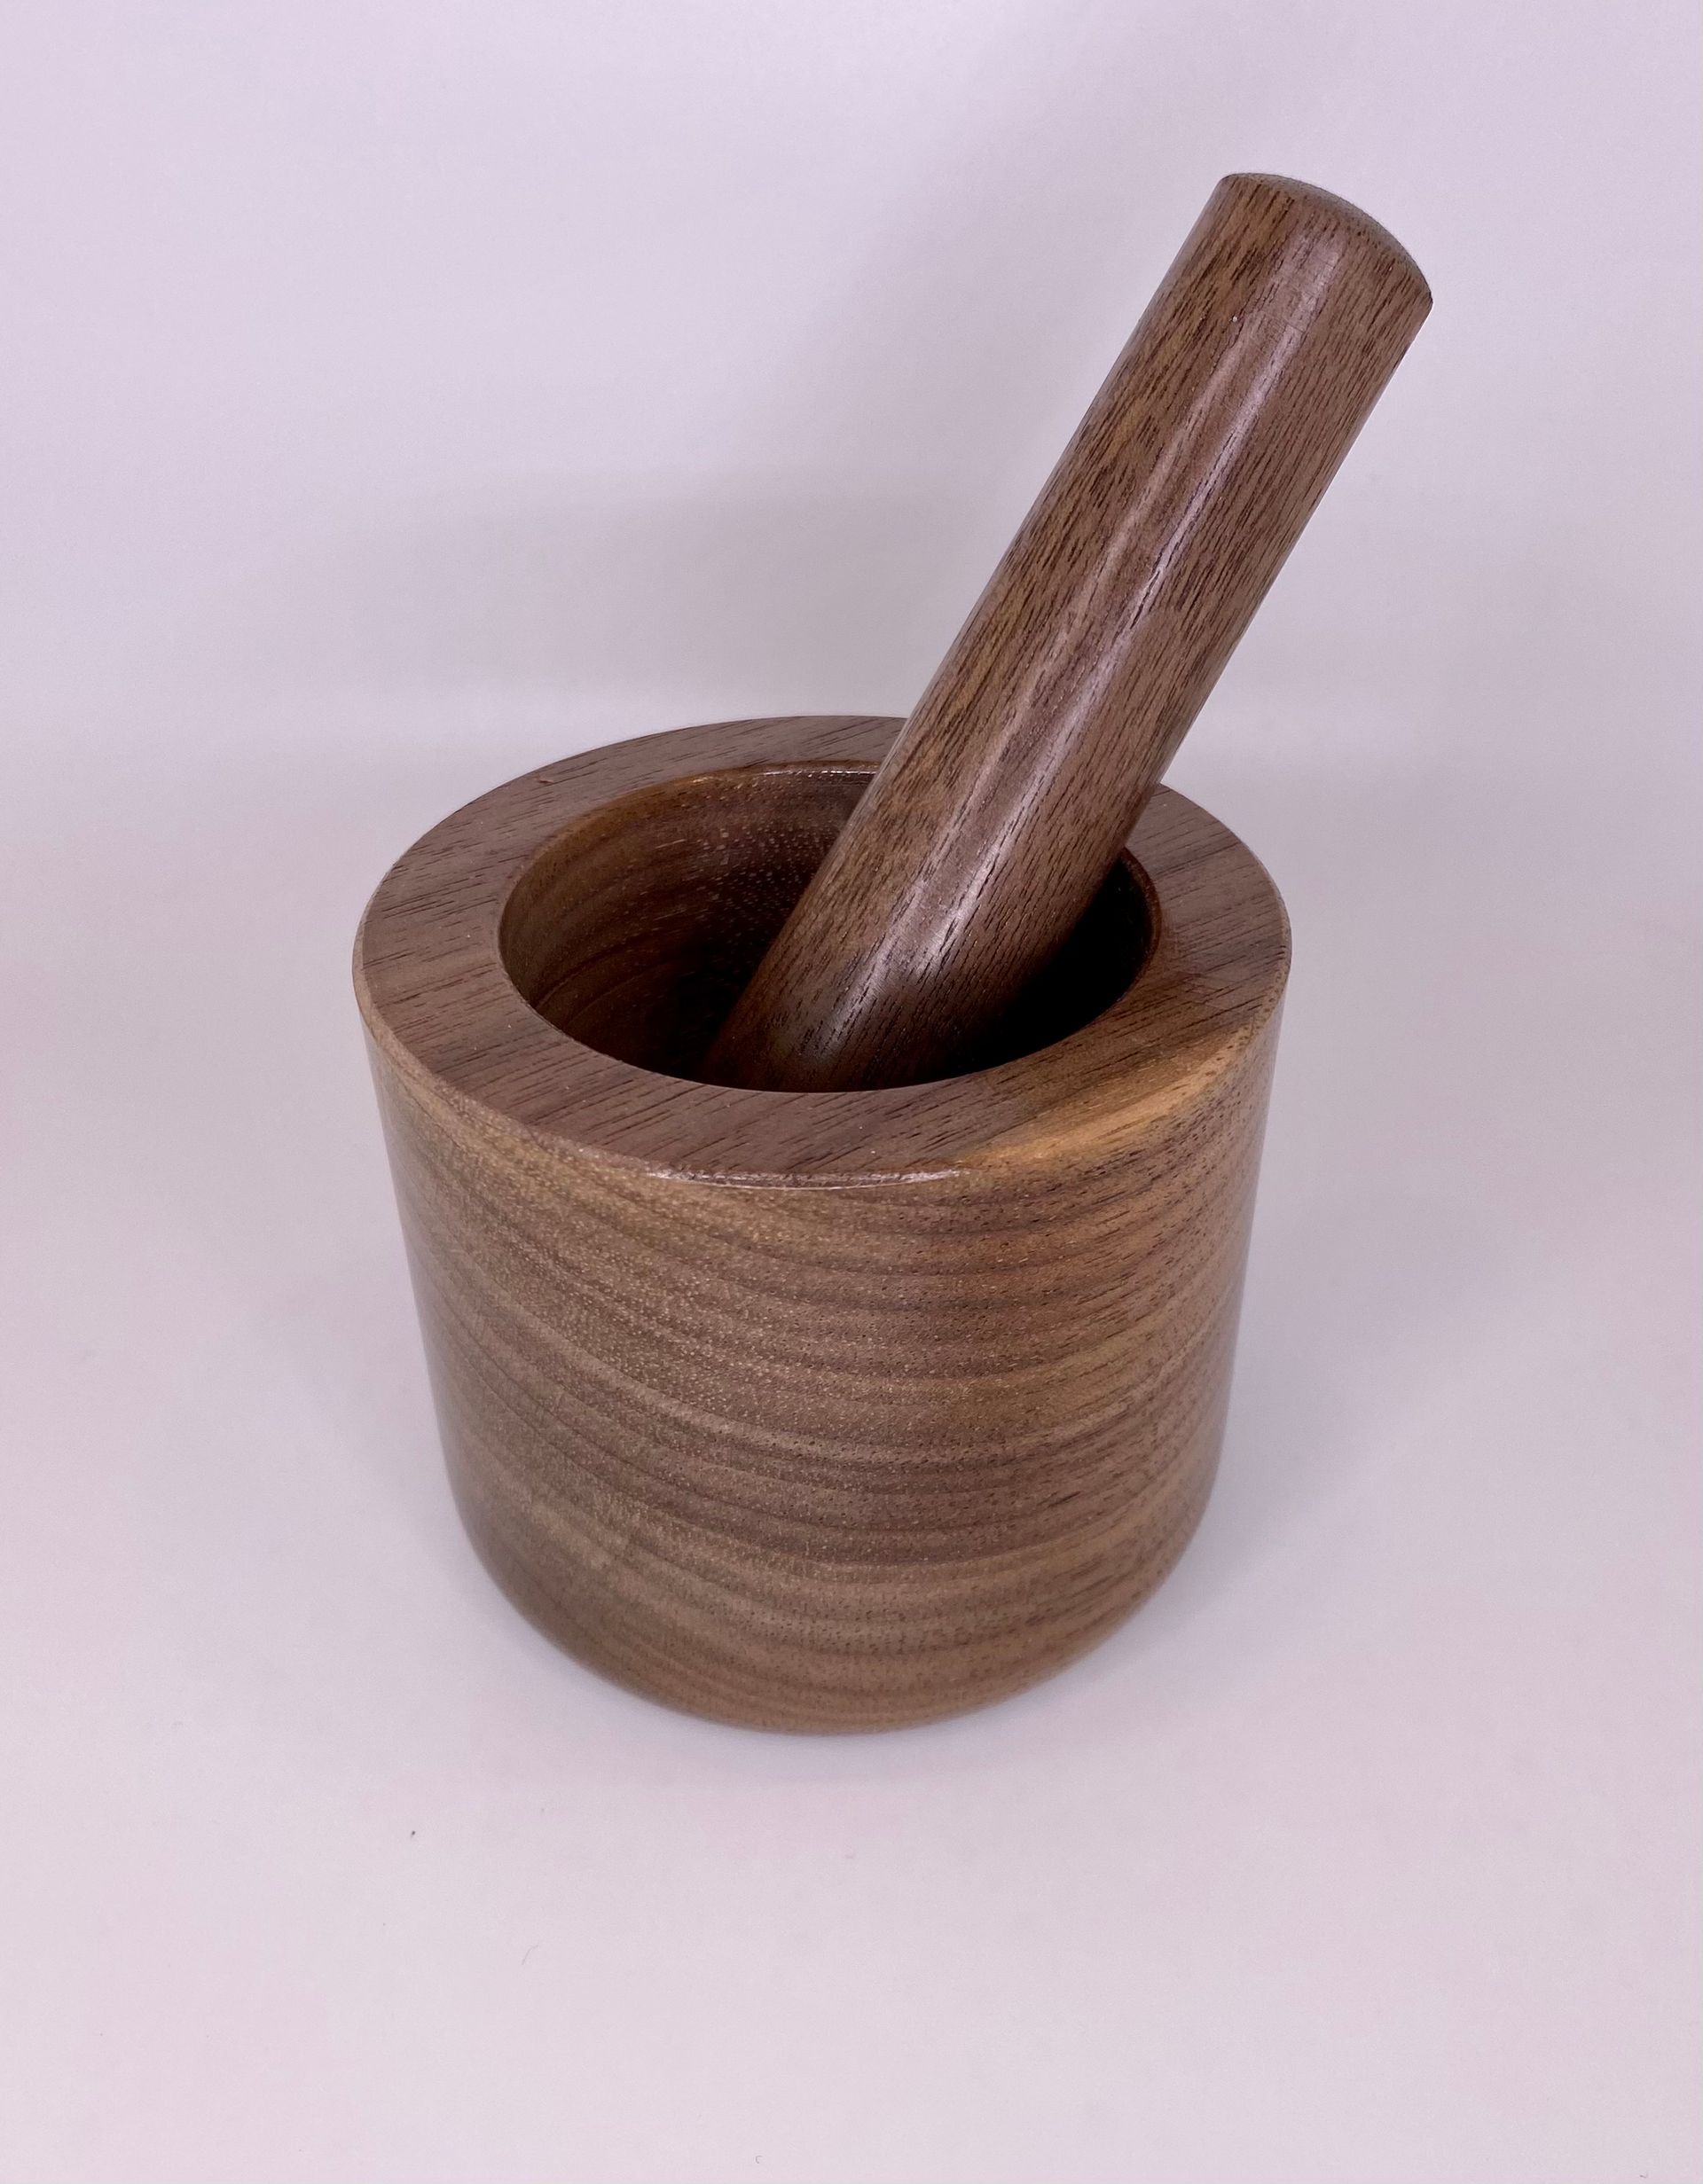 finished mortar and pestles